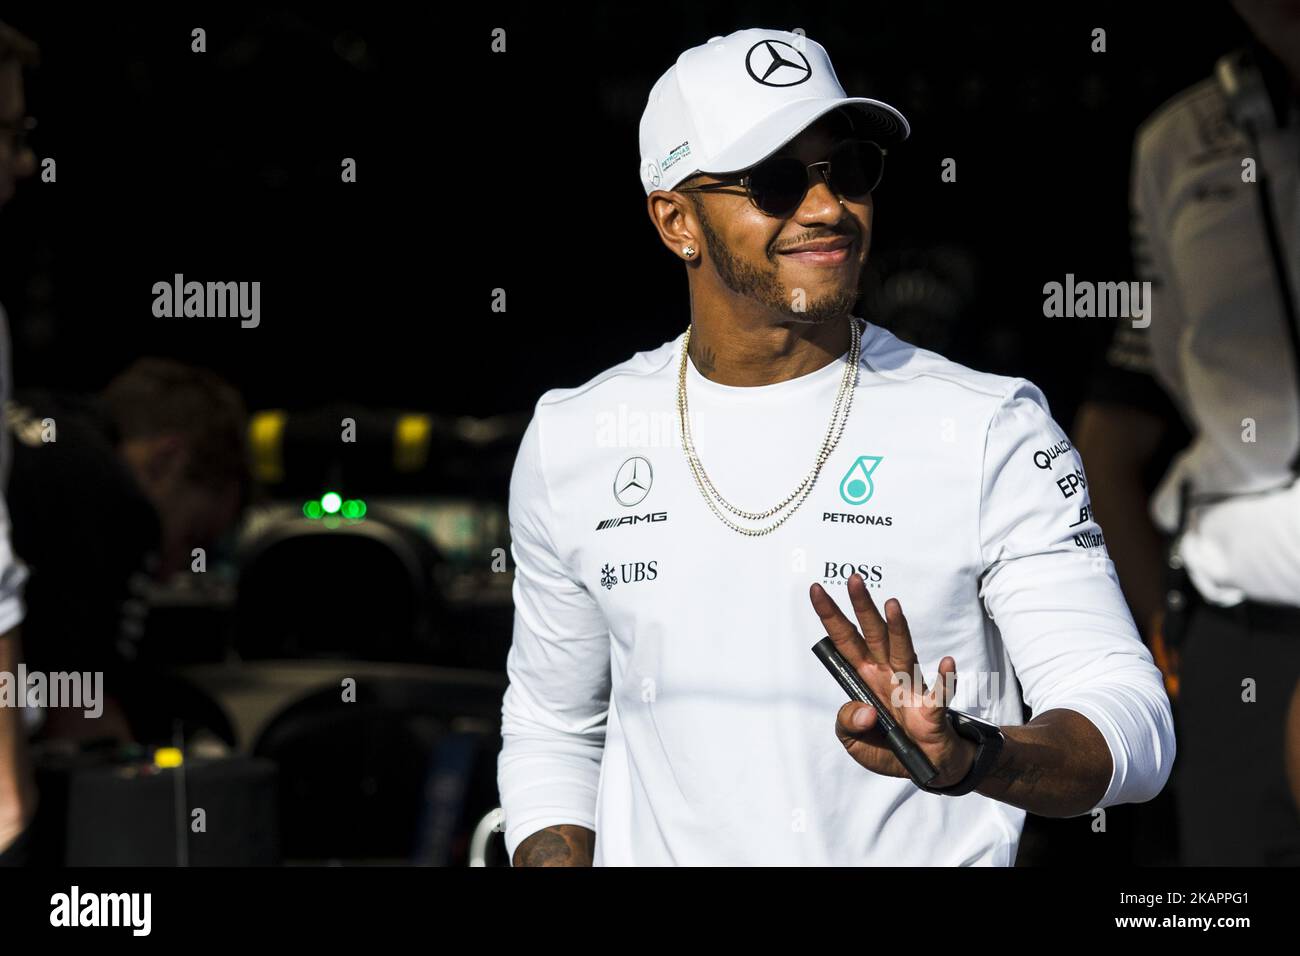 44 HAMILTON Lewis from Great Britain of team Mercedes GP during the Formula One Belgian Grand Prix at Circuit de Spa-Francorchamps on August 24, 2017 in Spa, Belgium. (Photo by Xavier Bonilla/NurPhoto) Stock Photo